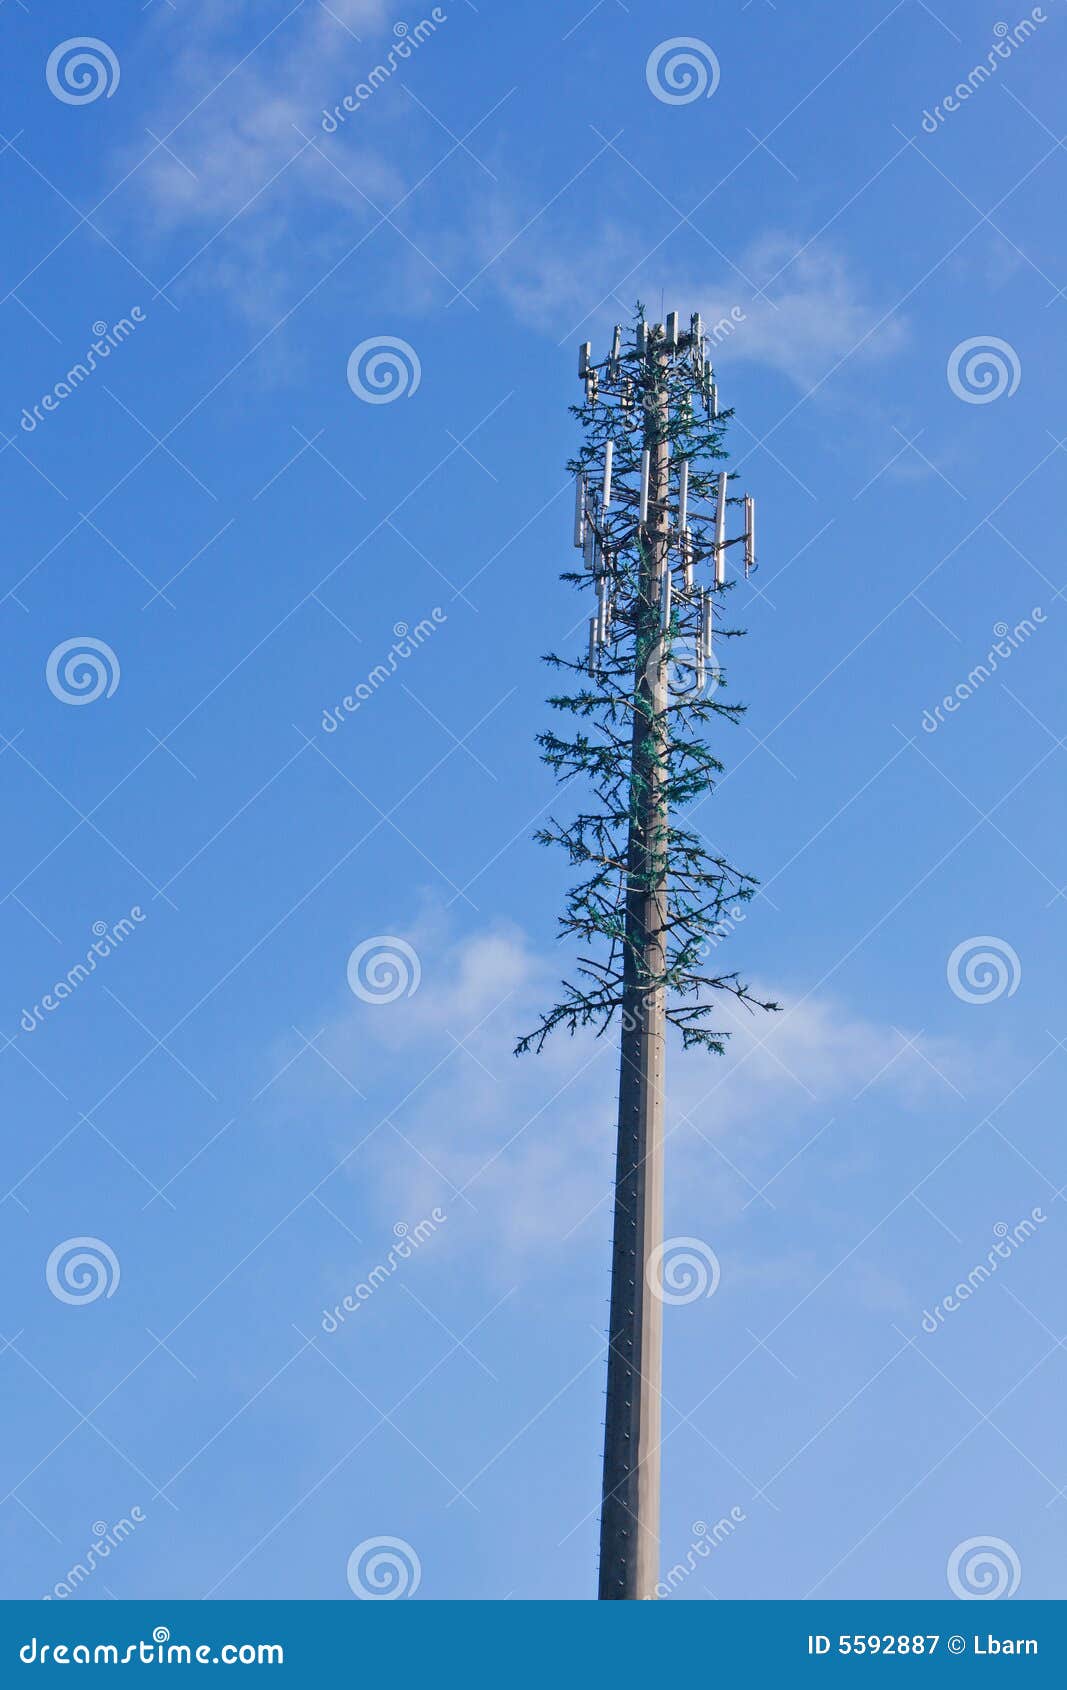 disguised mobile phone tower